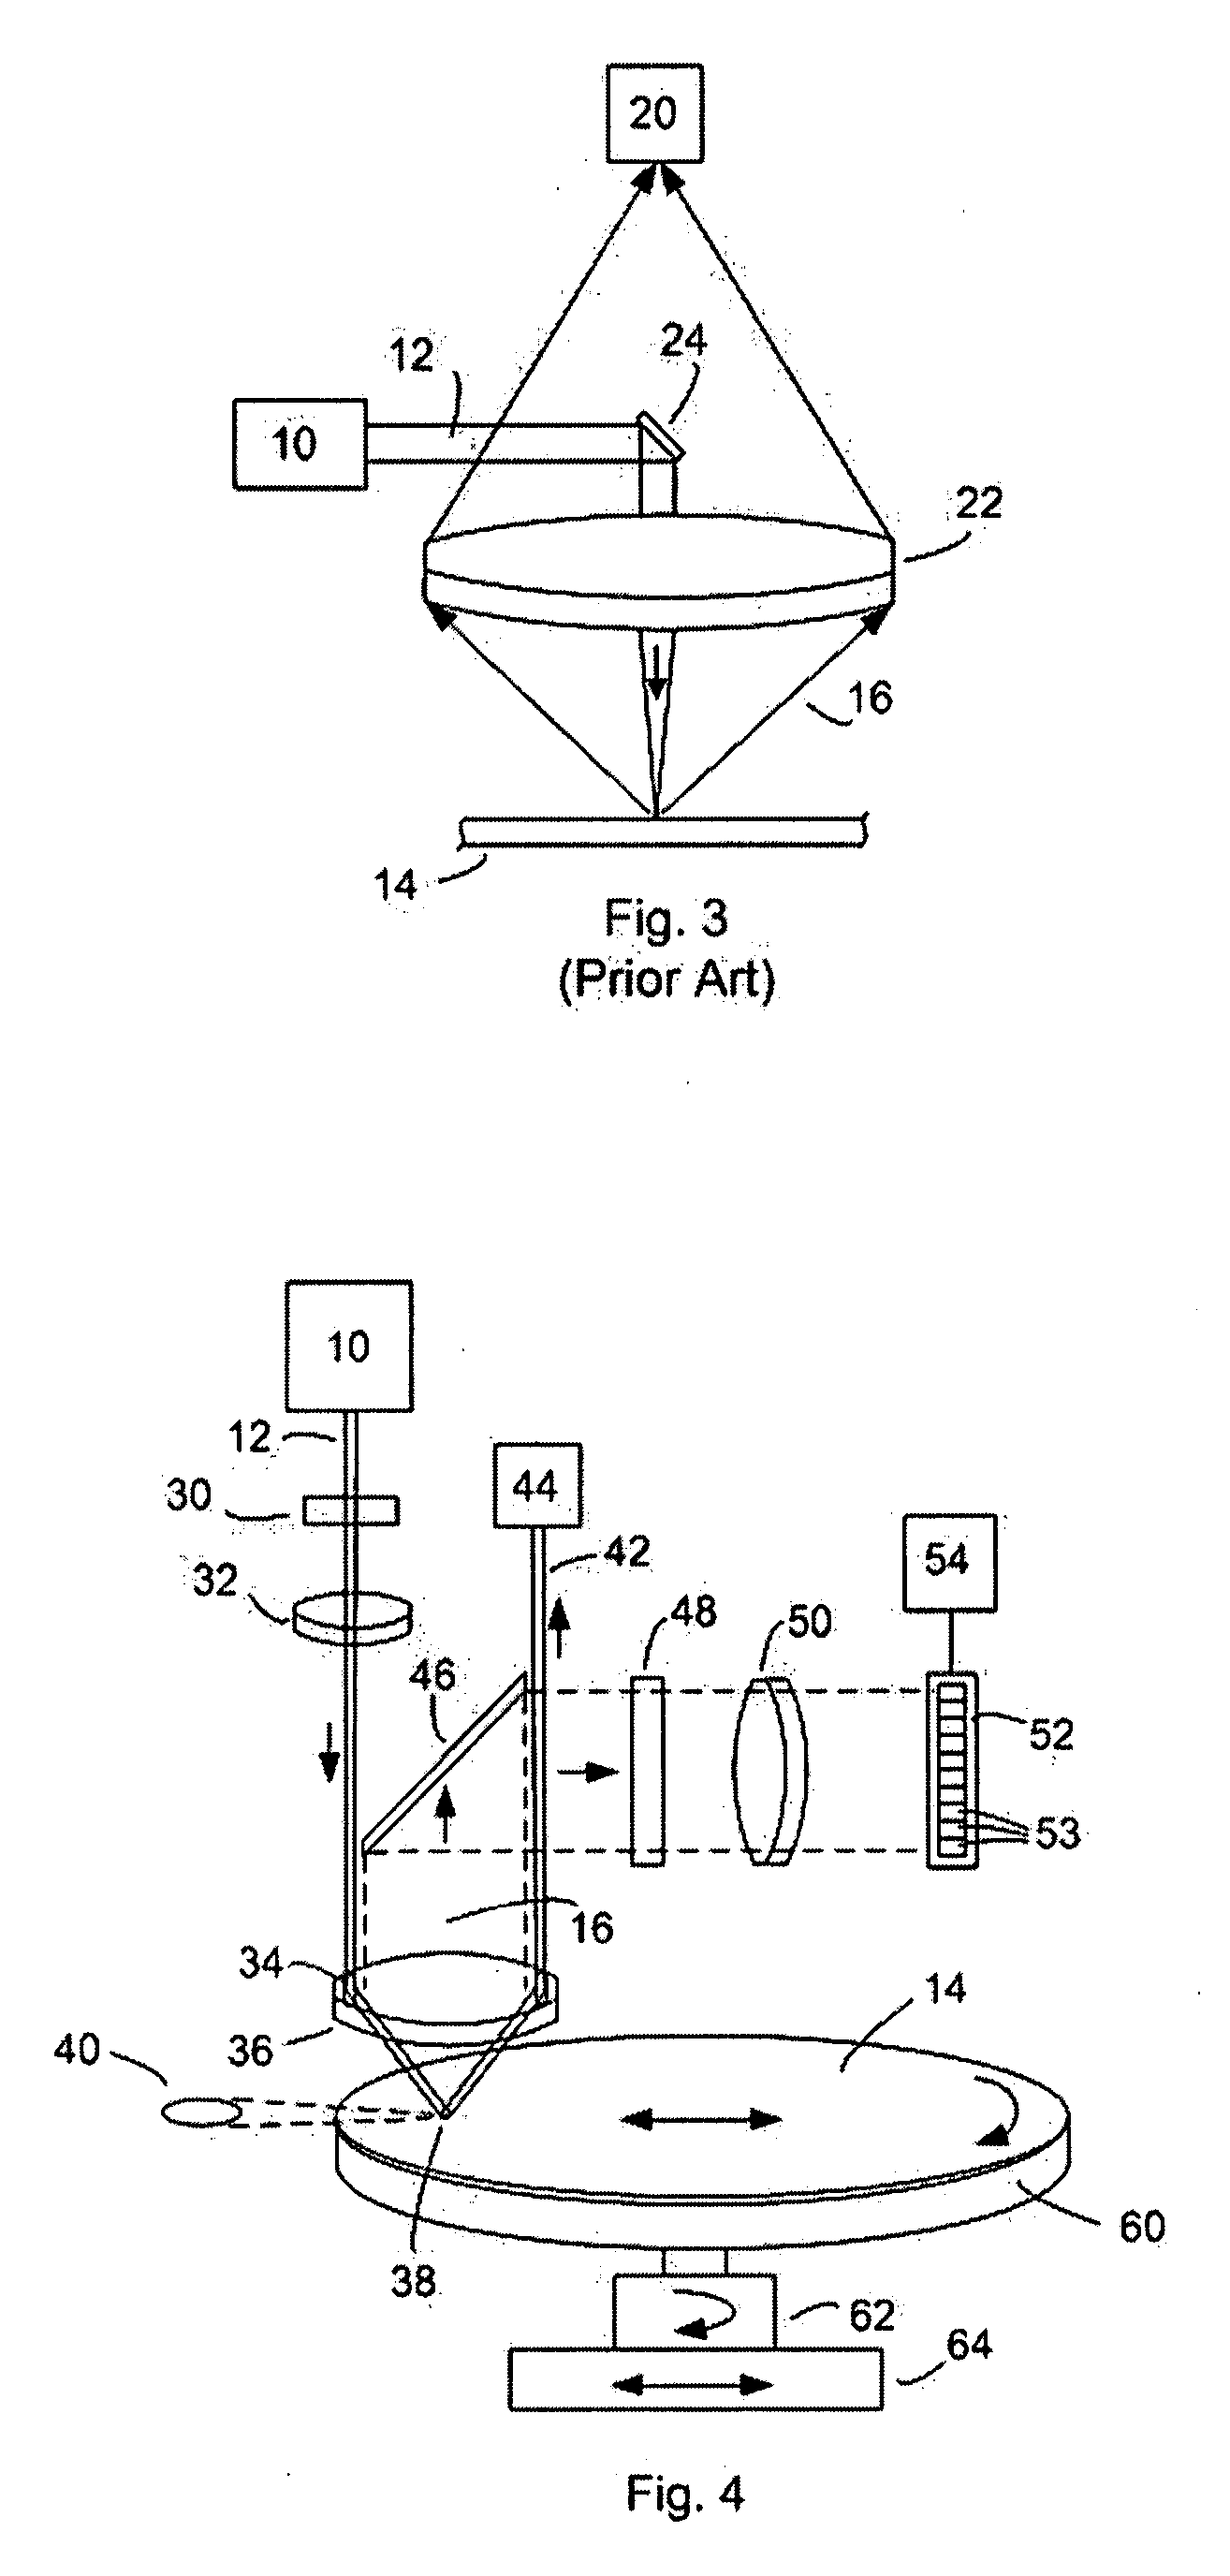 High-sensitivity surface detection system and method